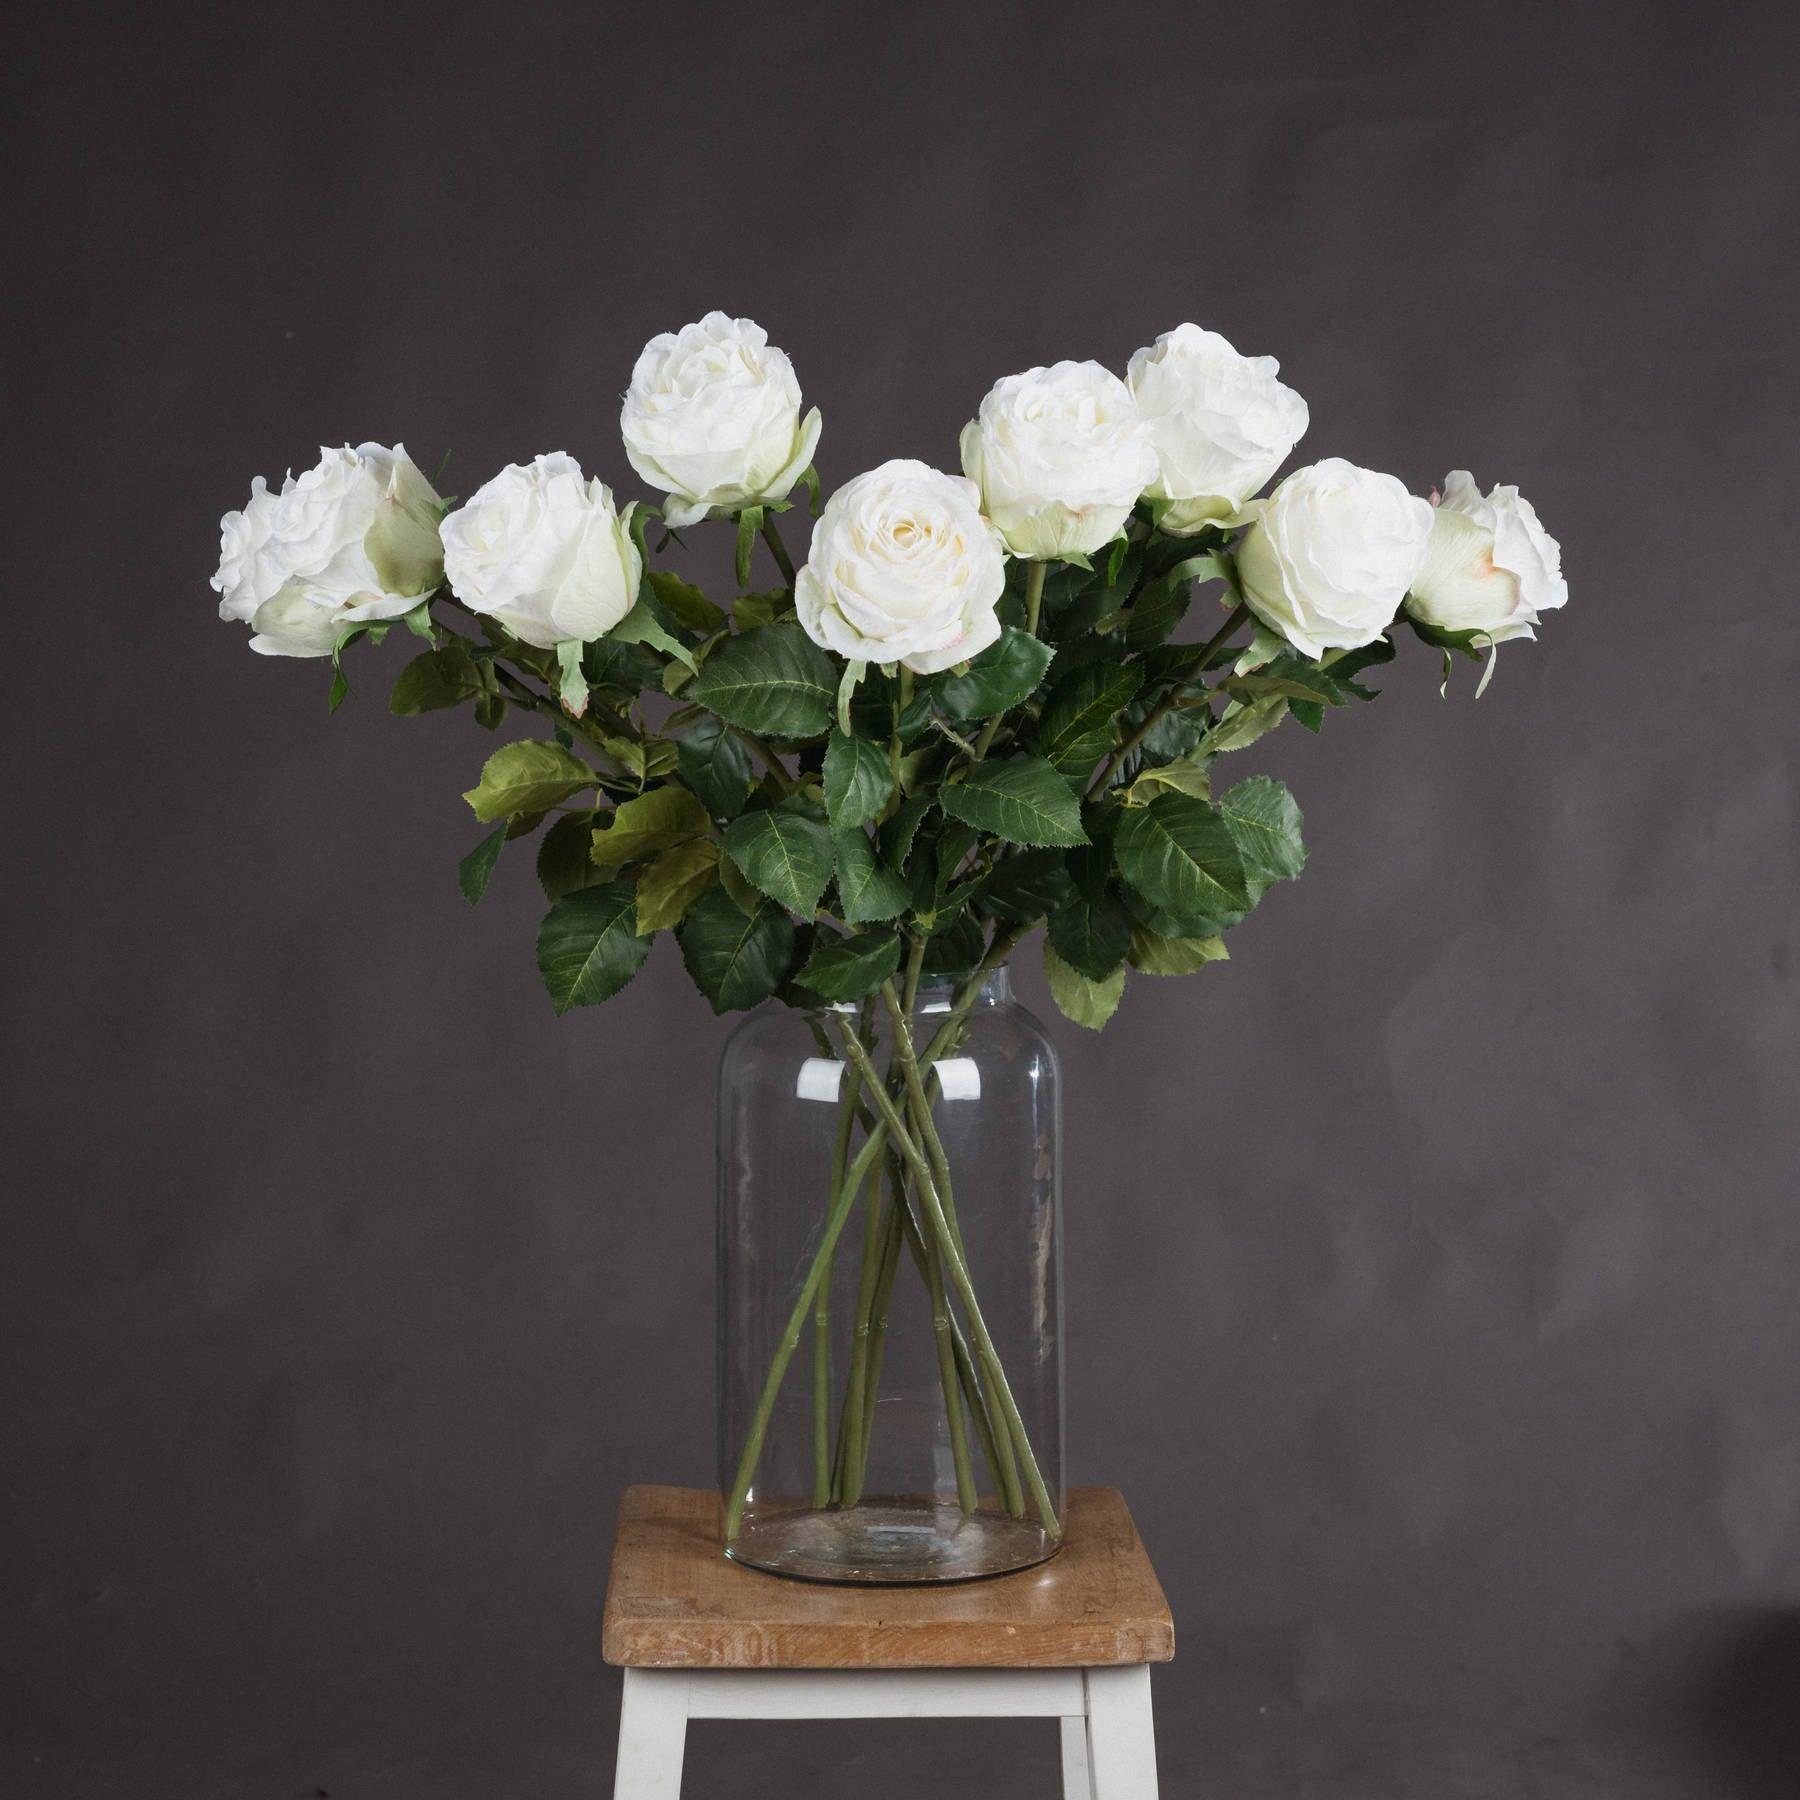 View Traditional White Rose information